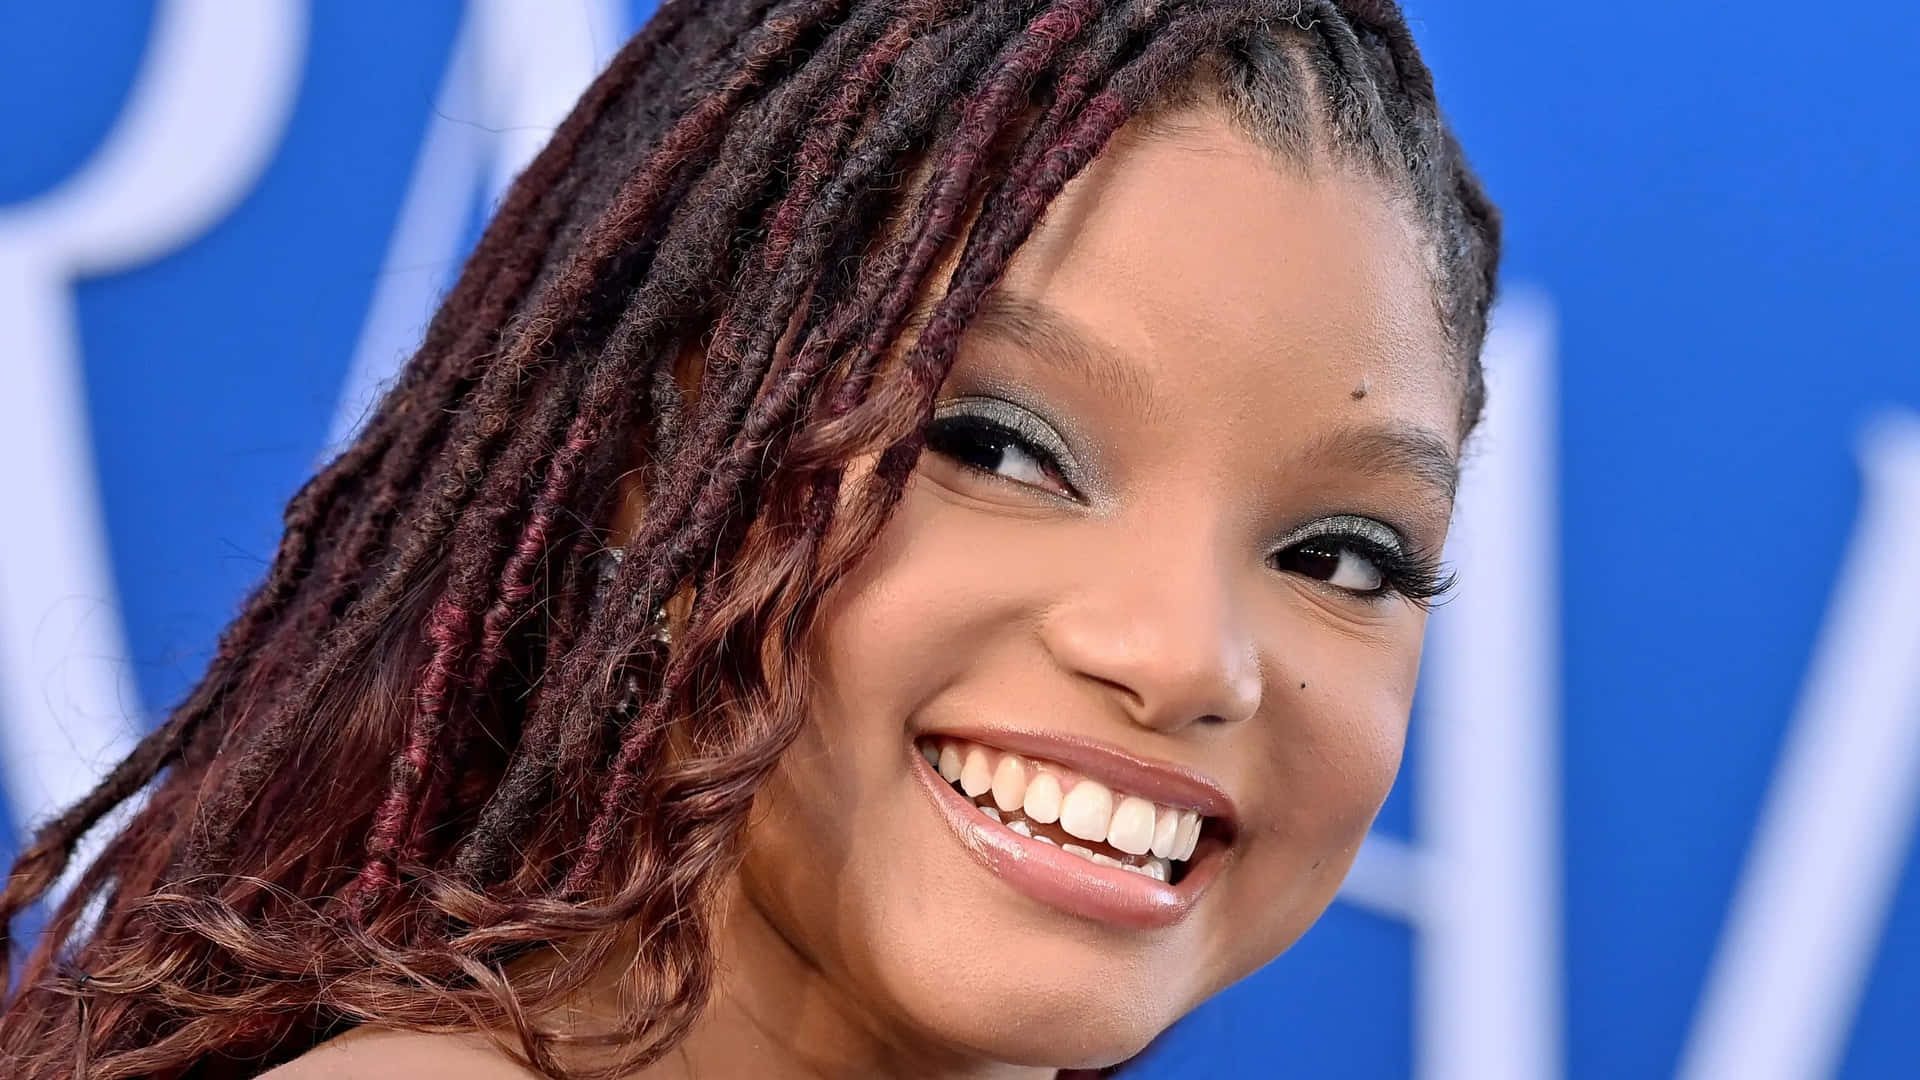 Smiling Celebritywith Braids Blue Backdrop Background